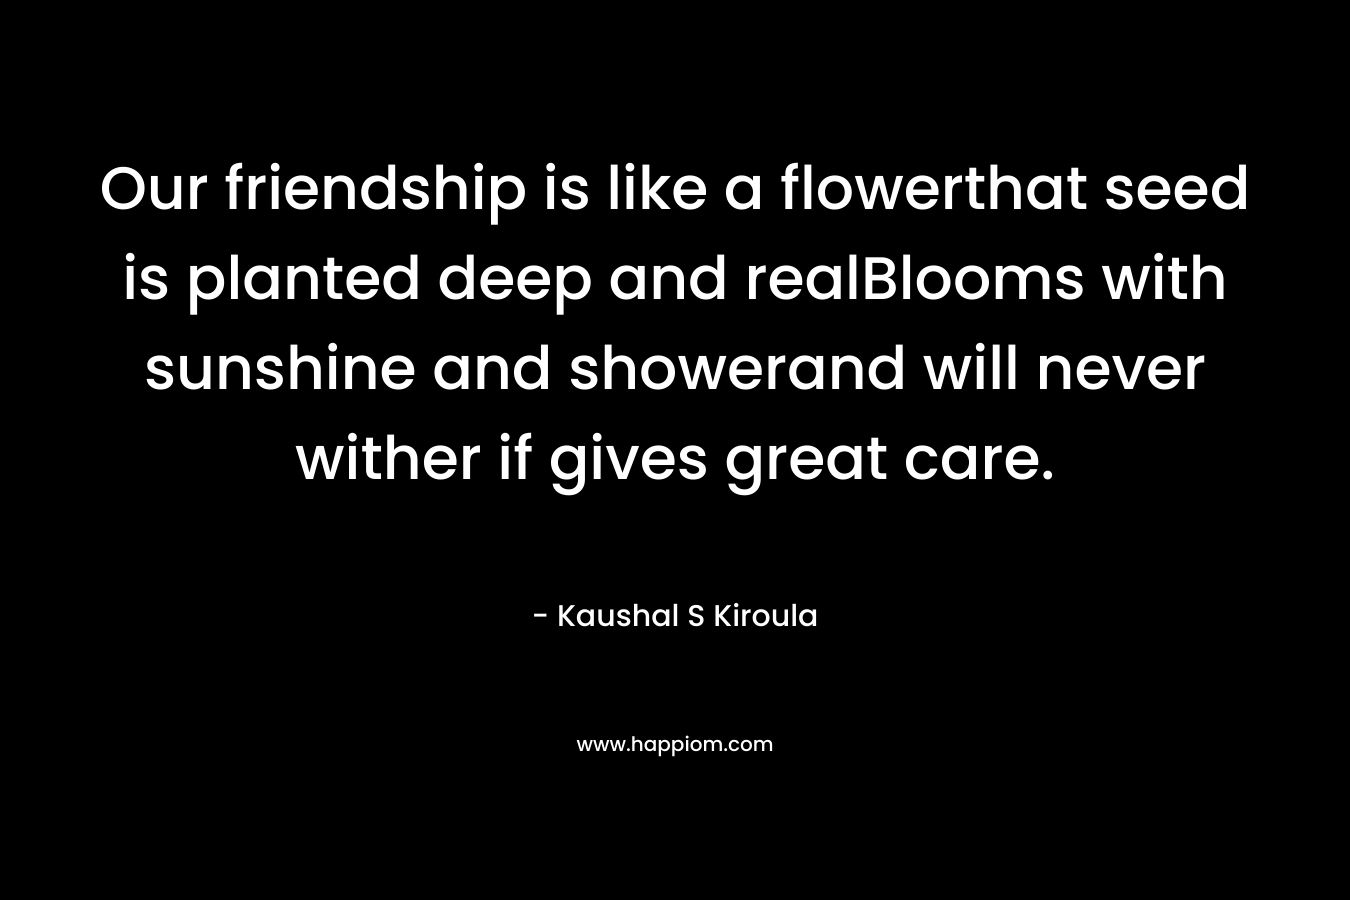 Our friendship is like a flowerthat seed is planted deep and realBlooms with sunshine and showerand will never wither if gives great care.